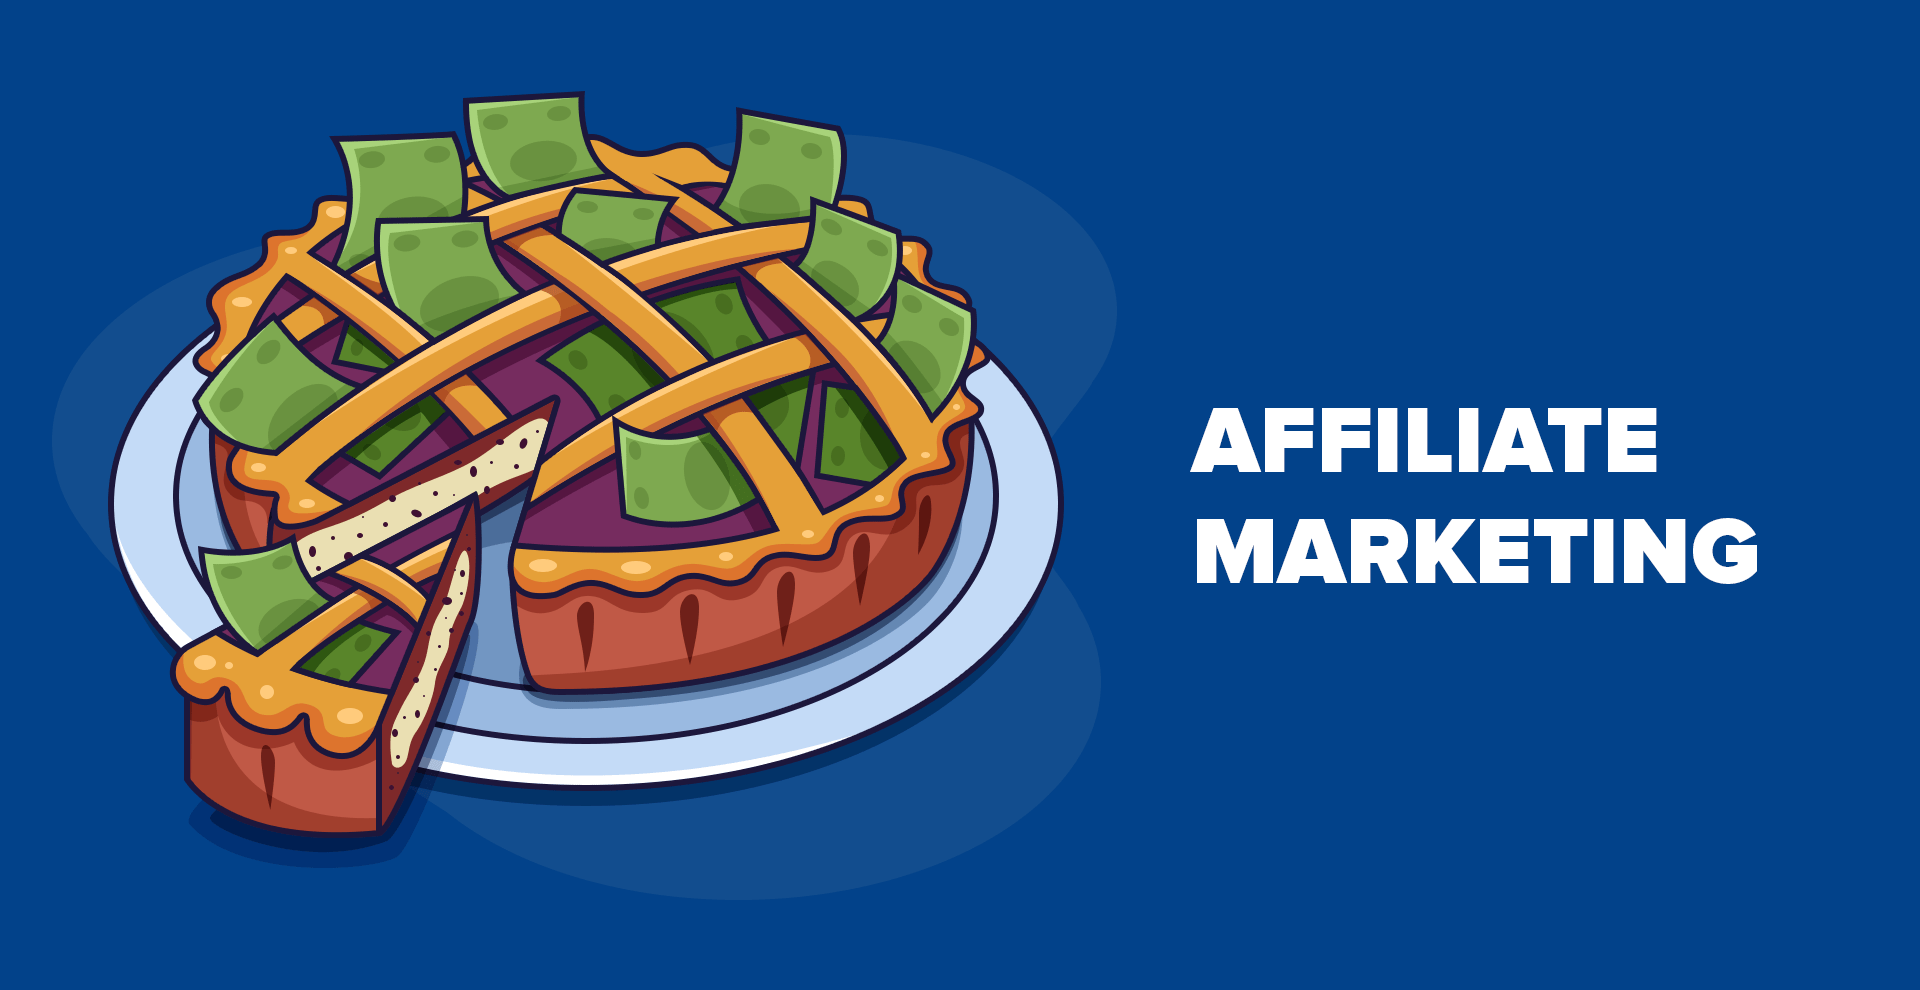 30 Best Affiliate Marketing Networks & Companies in 2020